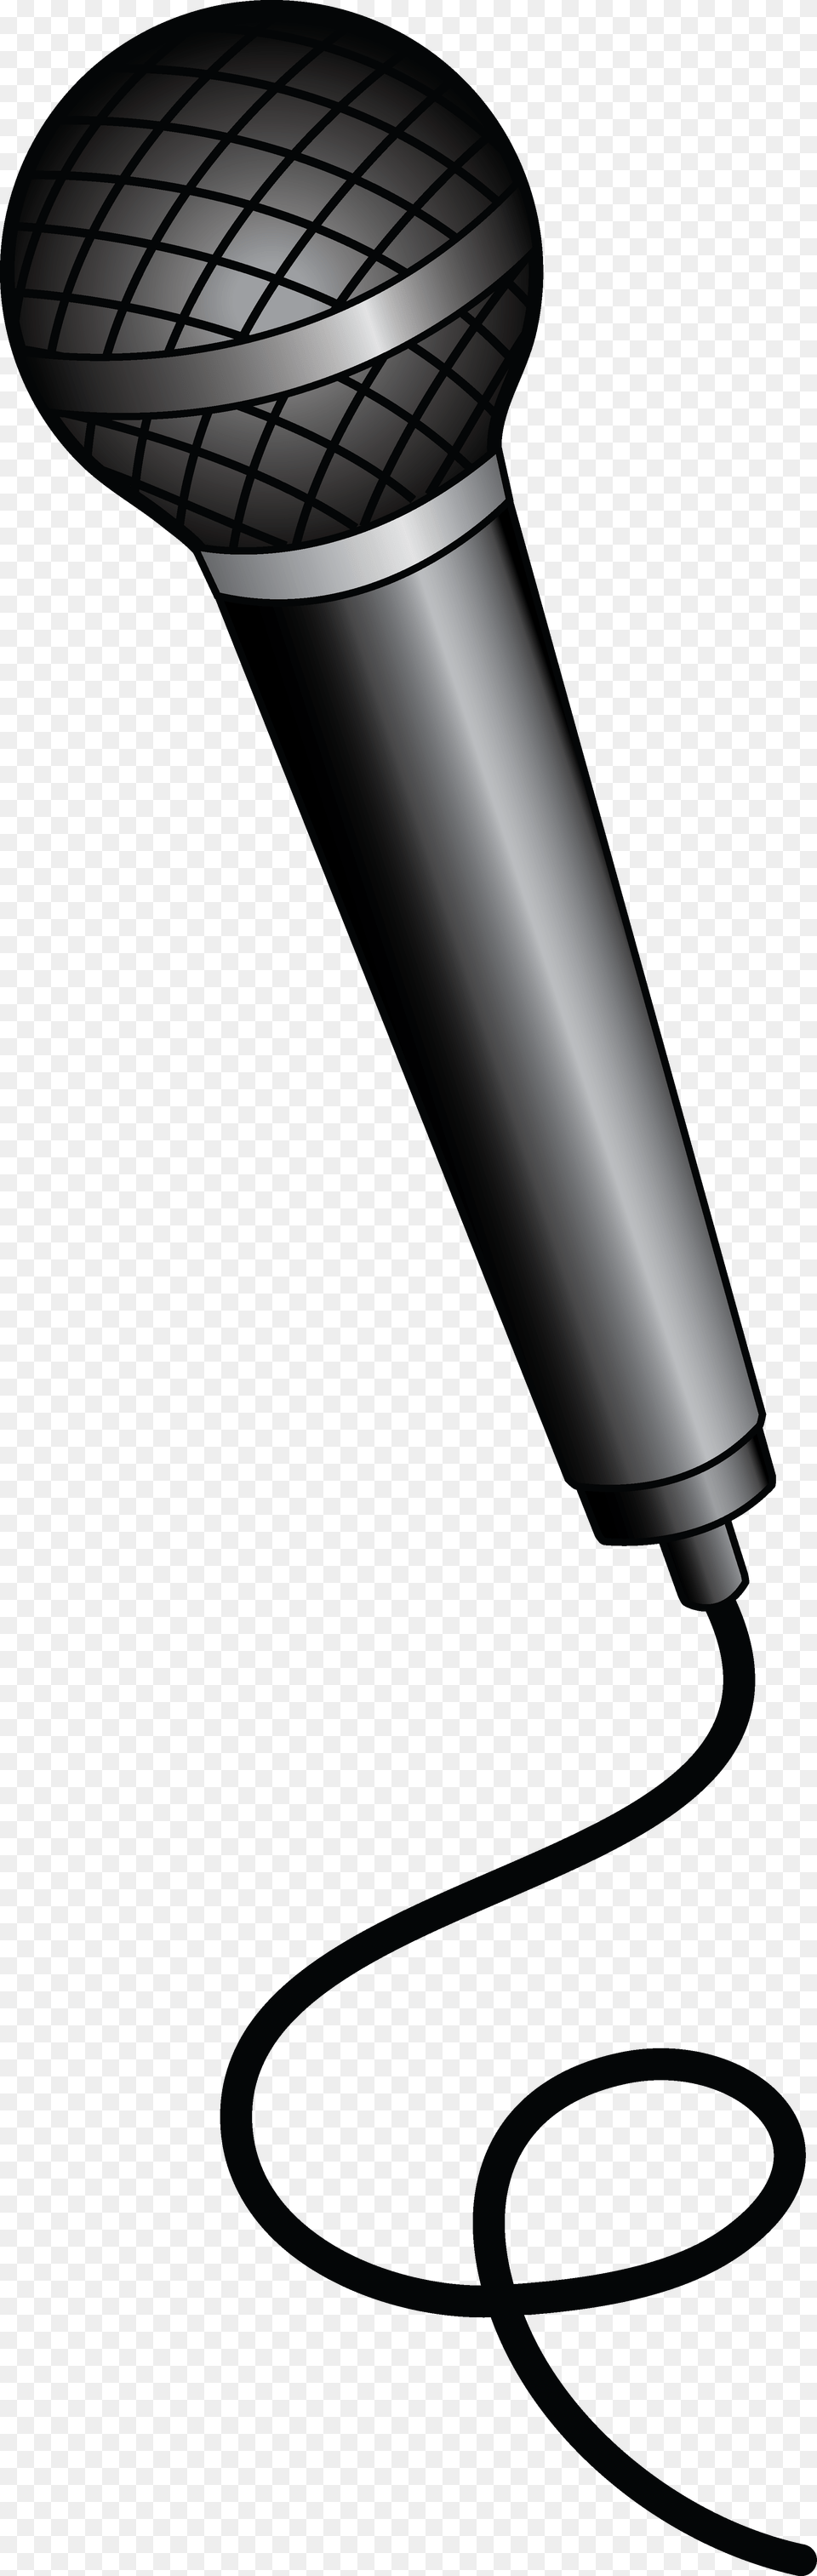 Microphone Cliparts Cartoon Microphone, Electrical Device, Bottle, Shaker Free Png Download